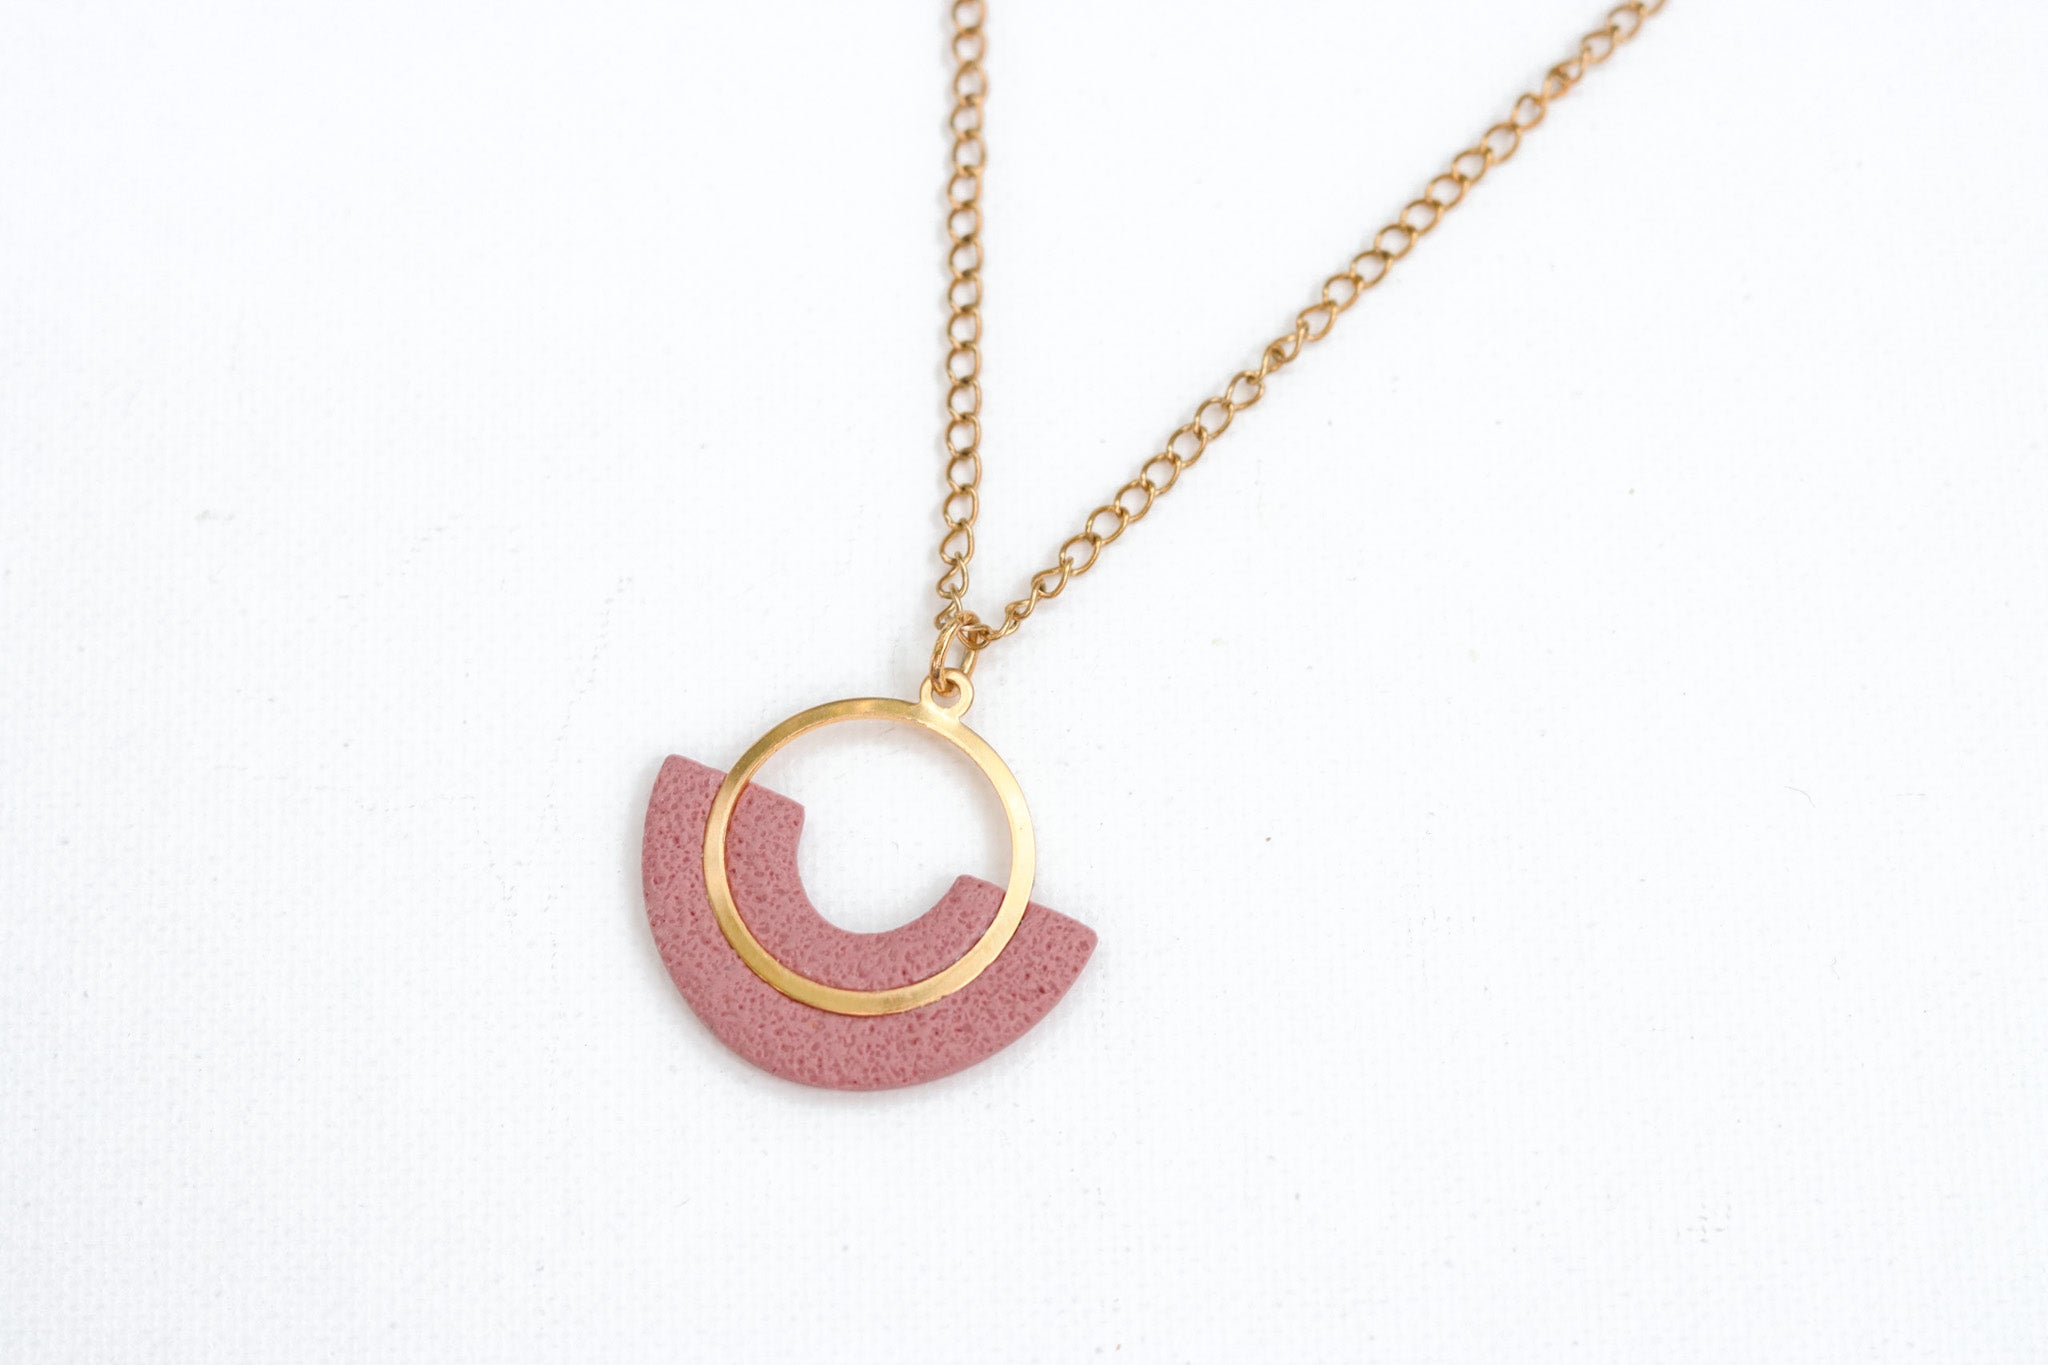 Polymer Clay Necklace Ideas You'll Want to Try - DIY Candy